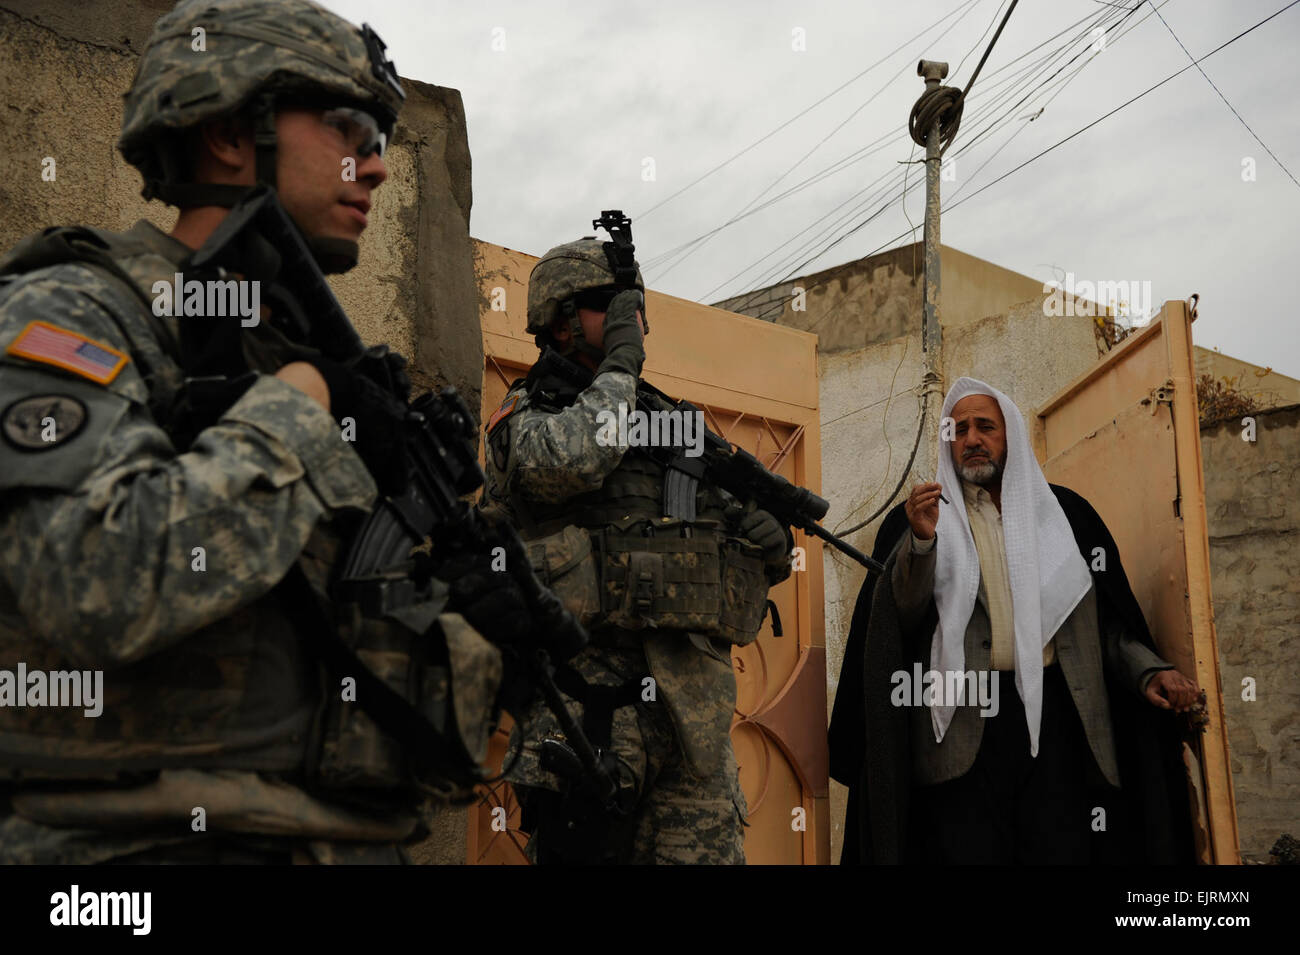 U.S. Army 1st Lt. Jeremy Glossen left and Staff Sgt. Gary Pearson center of Ironhawk Troop, 3rd Squadron, 3rd Armored Cavalry Regiment from Fort Hood, Texas, stop to visit with a local Iraqi man during a patrol in the Al Qirwan neighborhood of Mosul, Iraq, Dec. 24, 2008.   U.S. Air Force  Staff Sgt. JoAnn S. Makinano Stock Photo